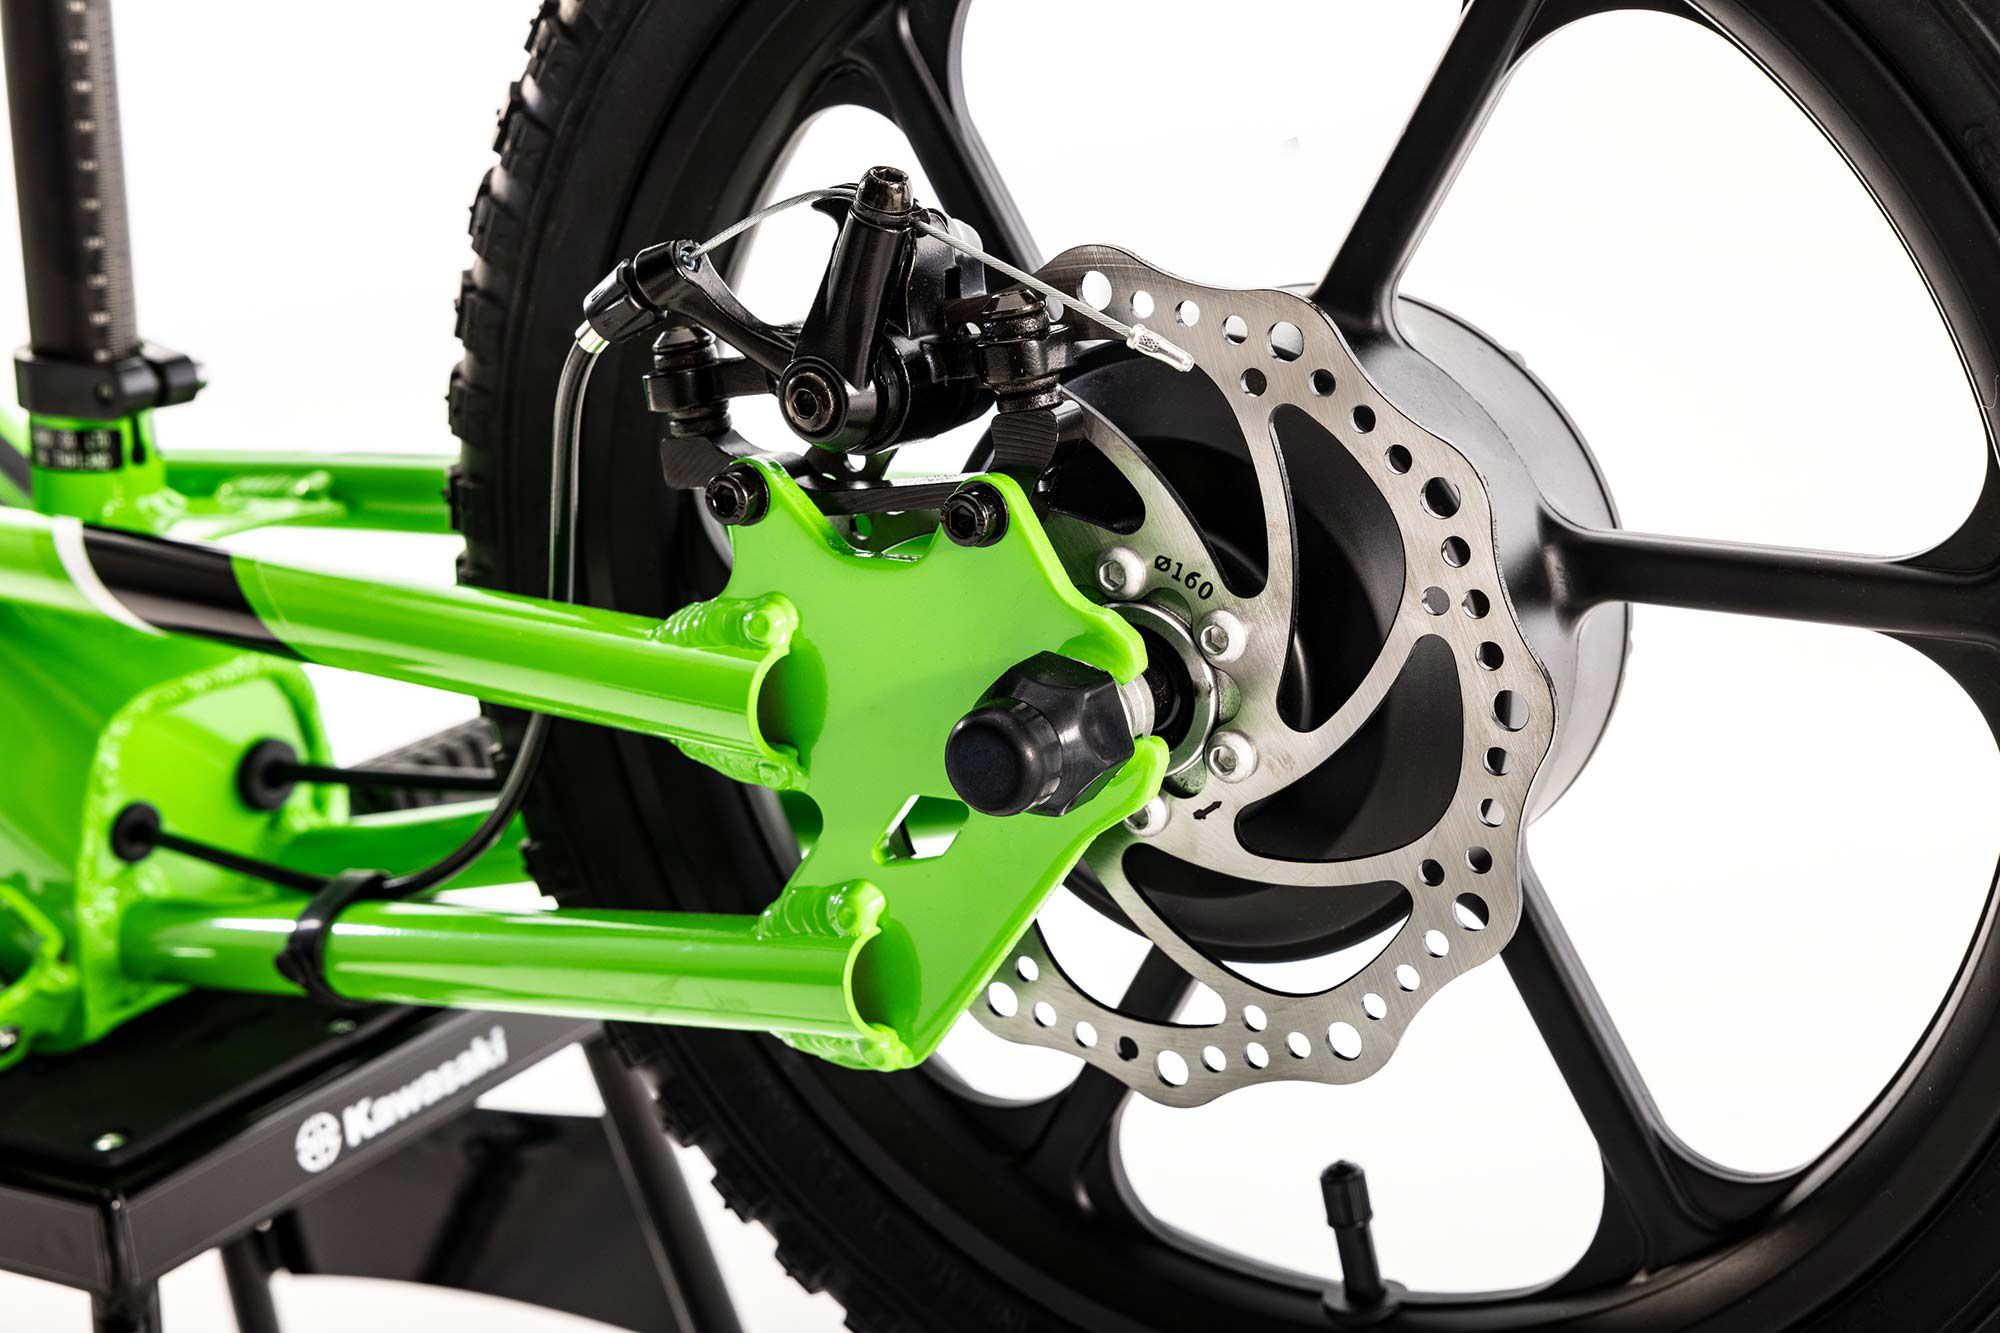 The 16-inch cast aluminum rear wheel is fitted with a 160mm mechanical disc brake.